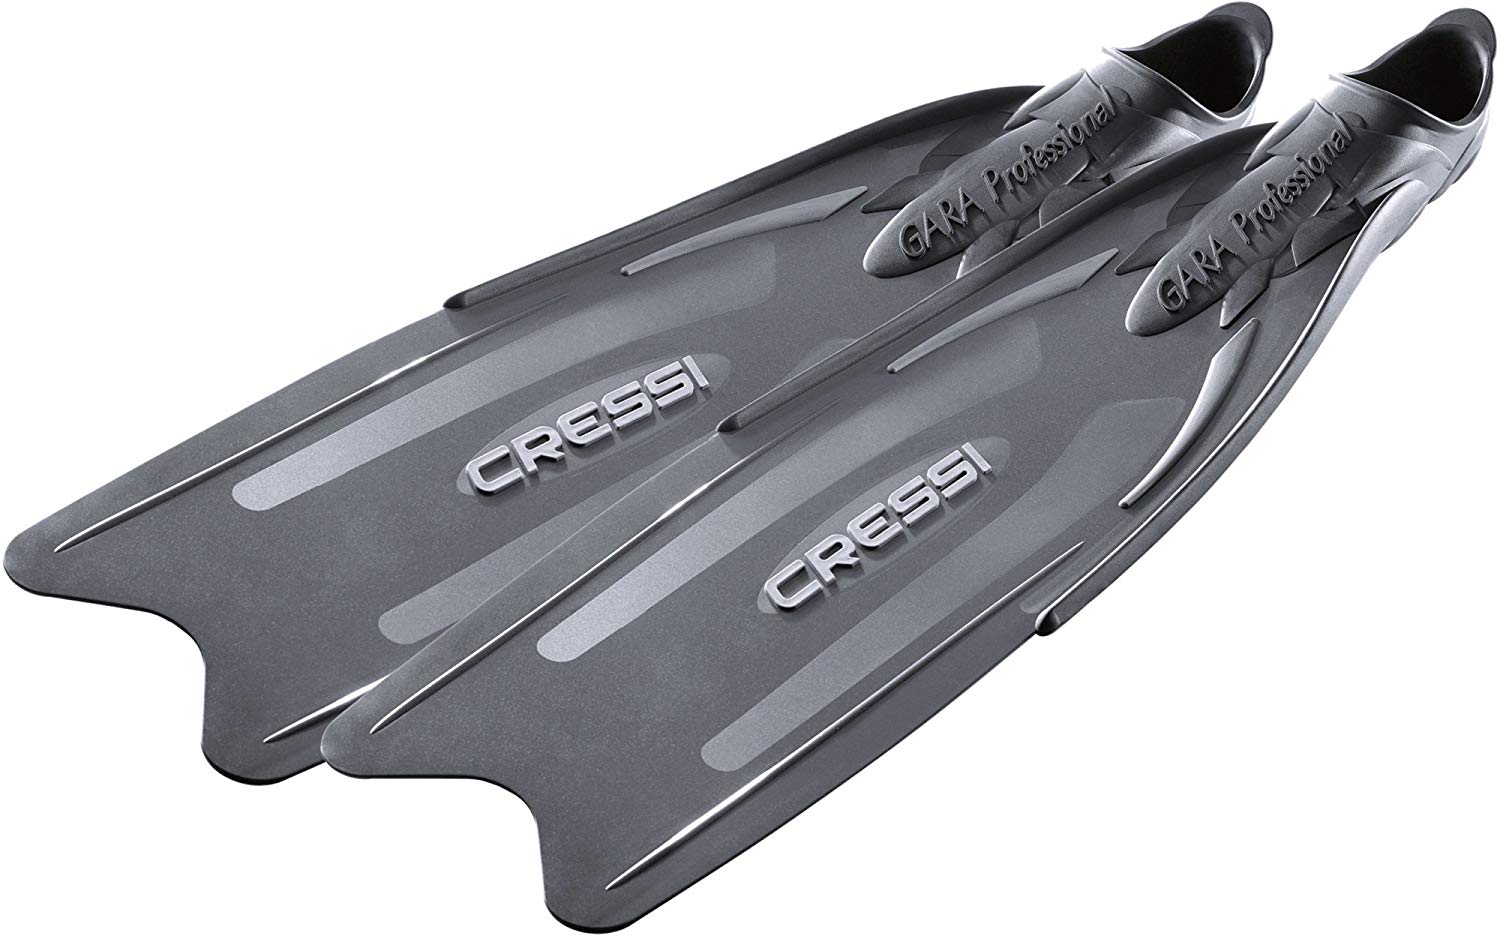 The best freediving fins for beginners are the Gara Professional LD's by Cressi.